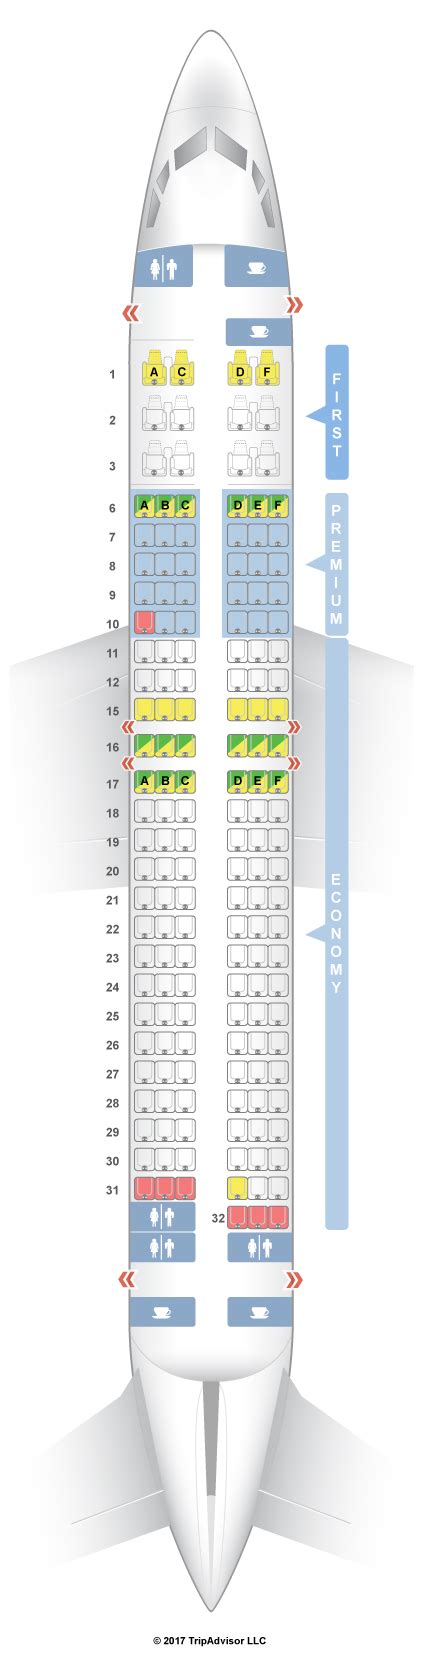 Posts: 13. AS letting me book F, but seat map shows no seats available. Looking at booking a trip in F and the site is letting me book an F seat but the seat map is showing F as fully booked (all seats colored gray). When I get to the screen in the booking process to choose a seat, the site tells me I will have a seat assigned later.. 